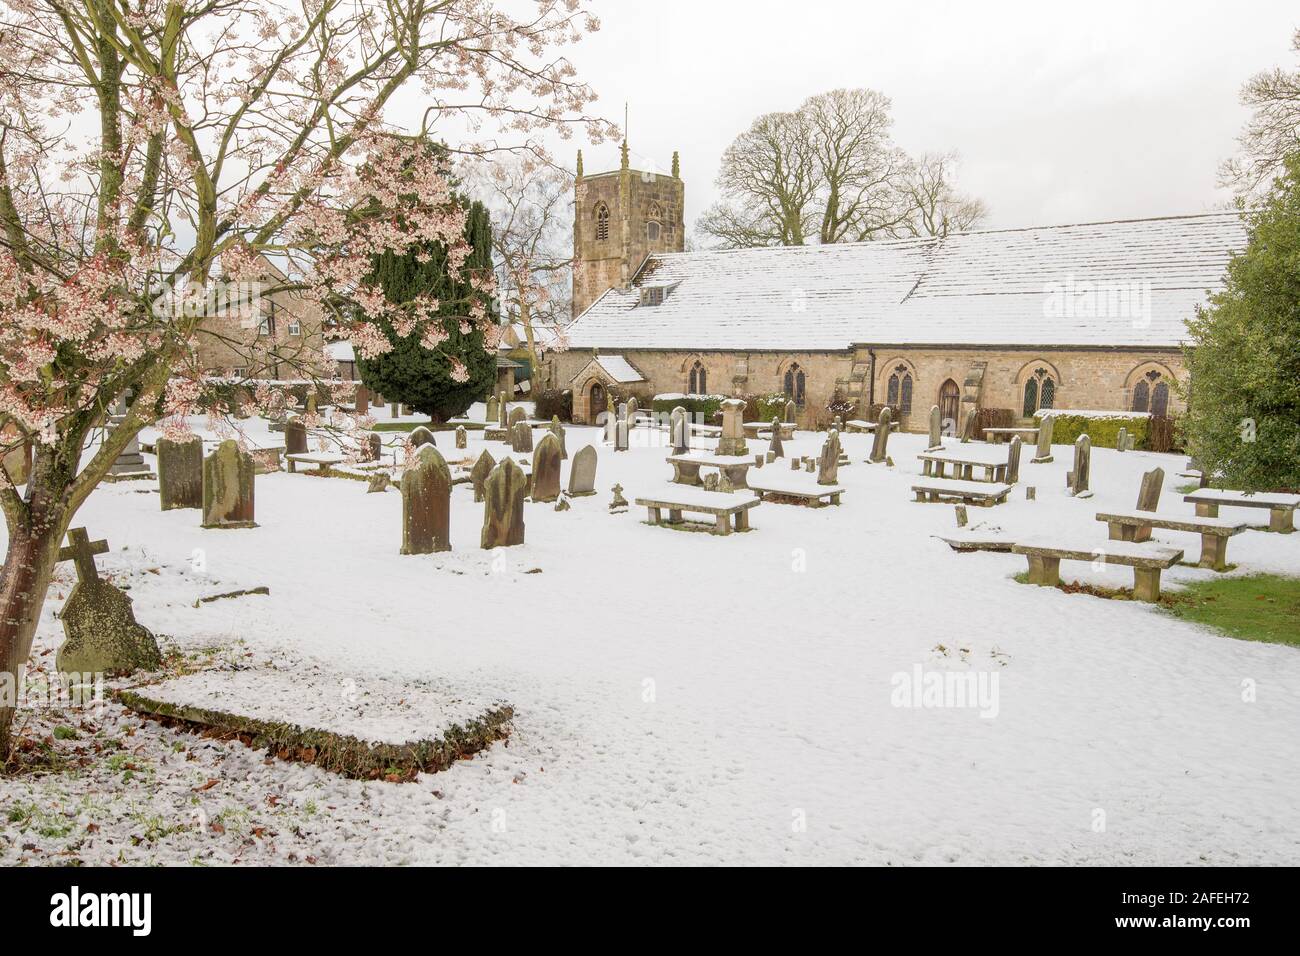 St Mary's in the snow Stock Photo